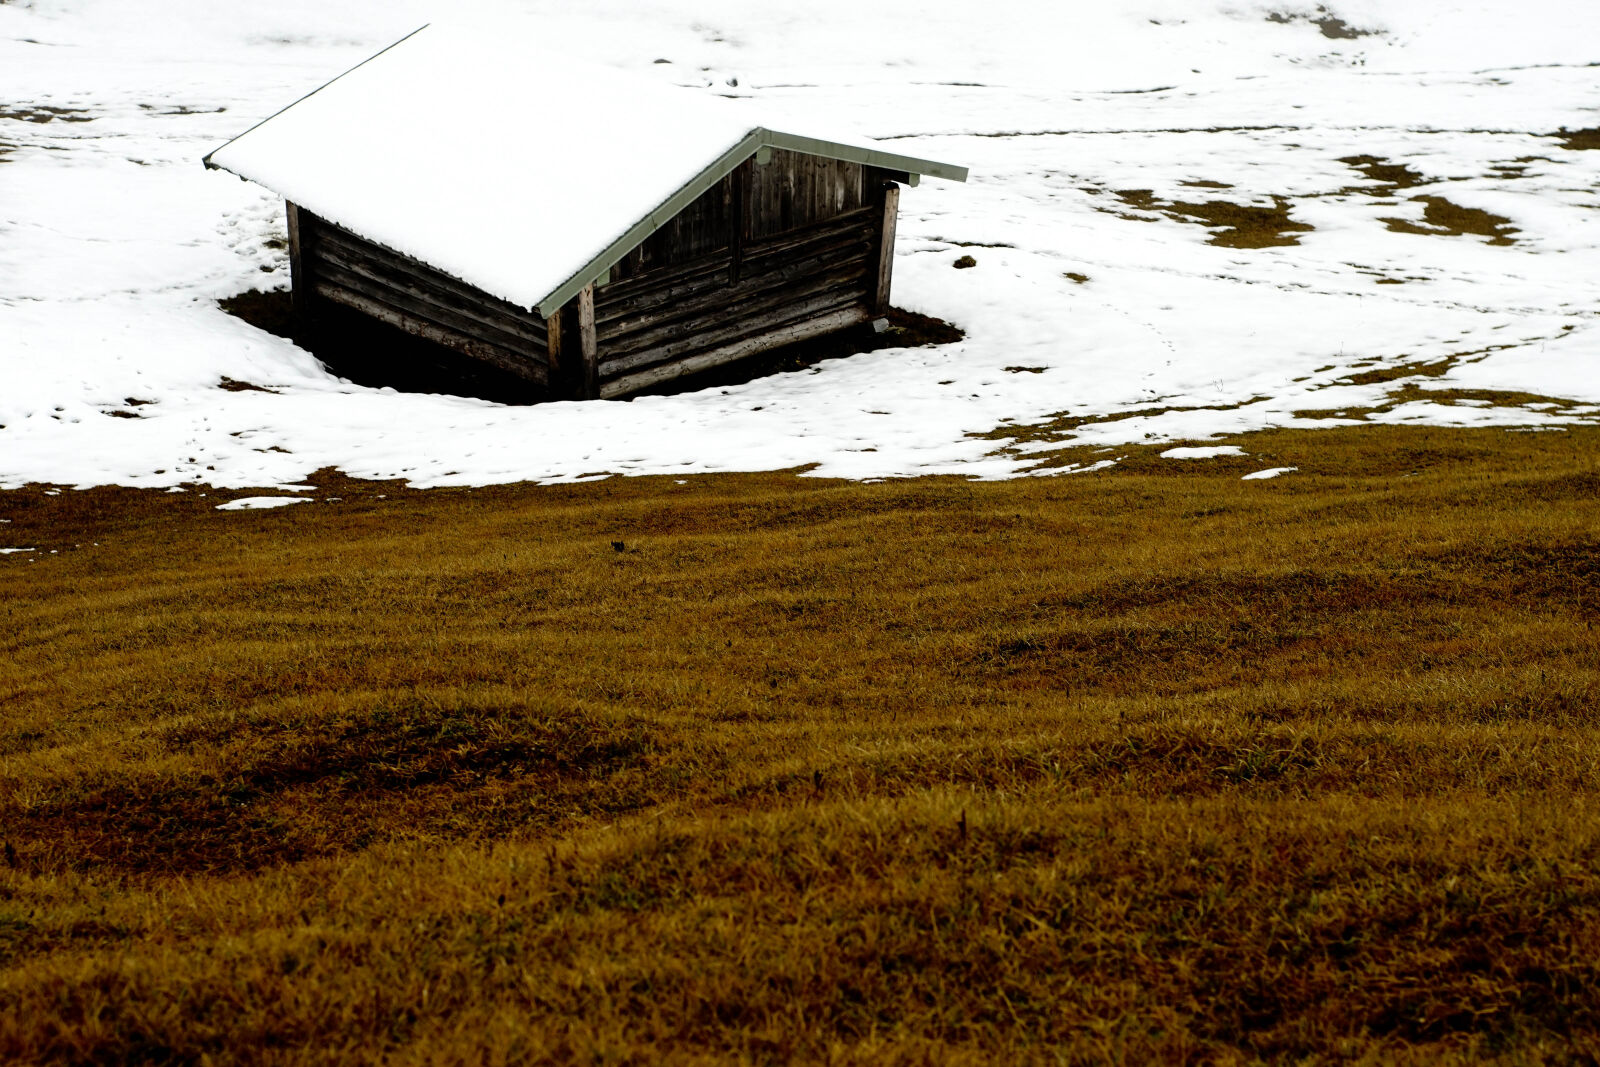 Sony DT 50mm F1.8 SAM sample photo. Hut, meadow, snowy, spring photography